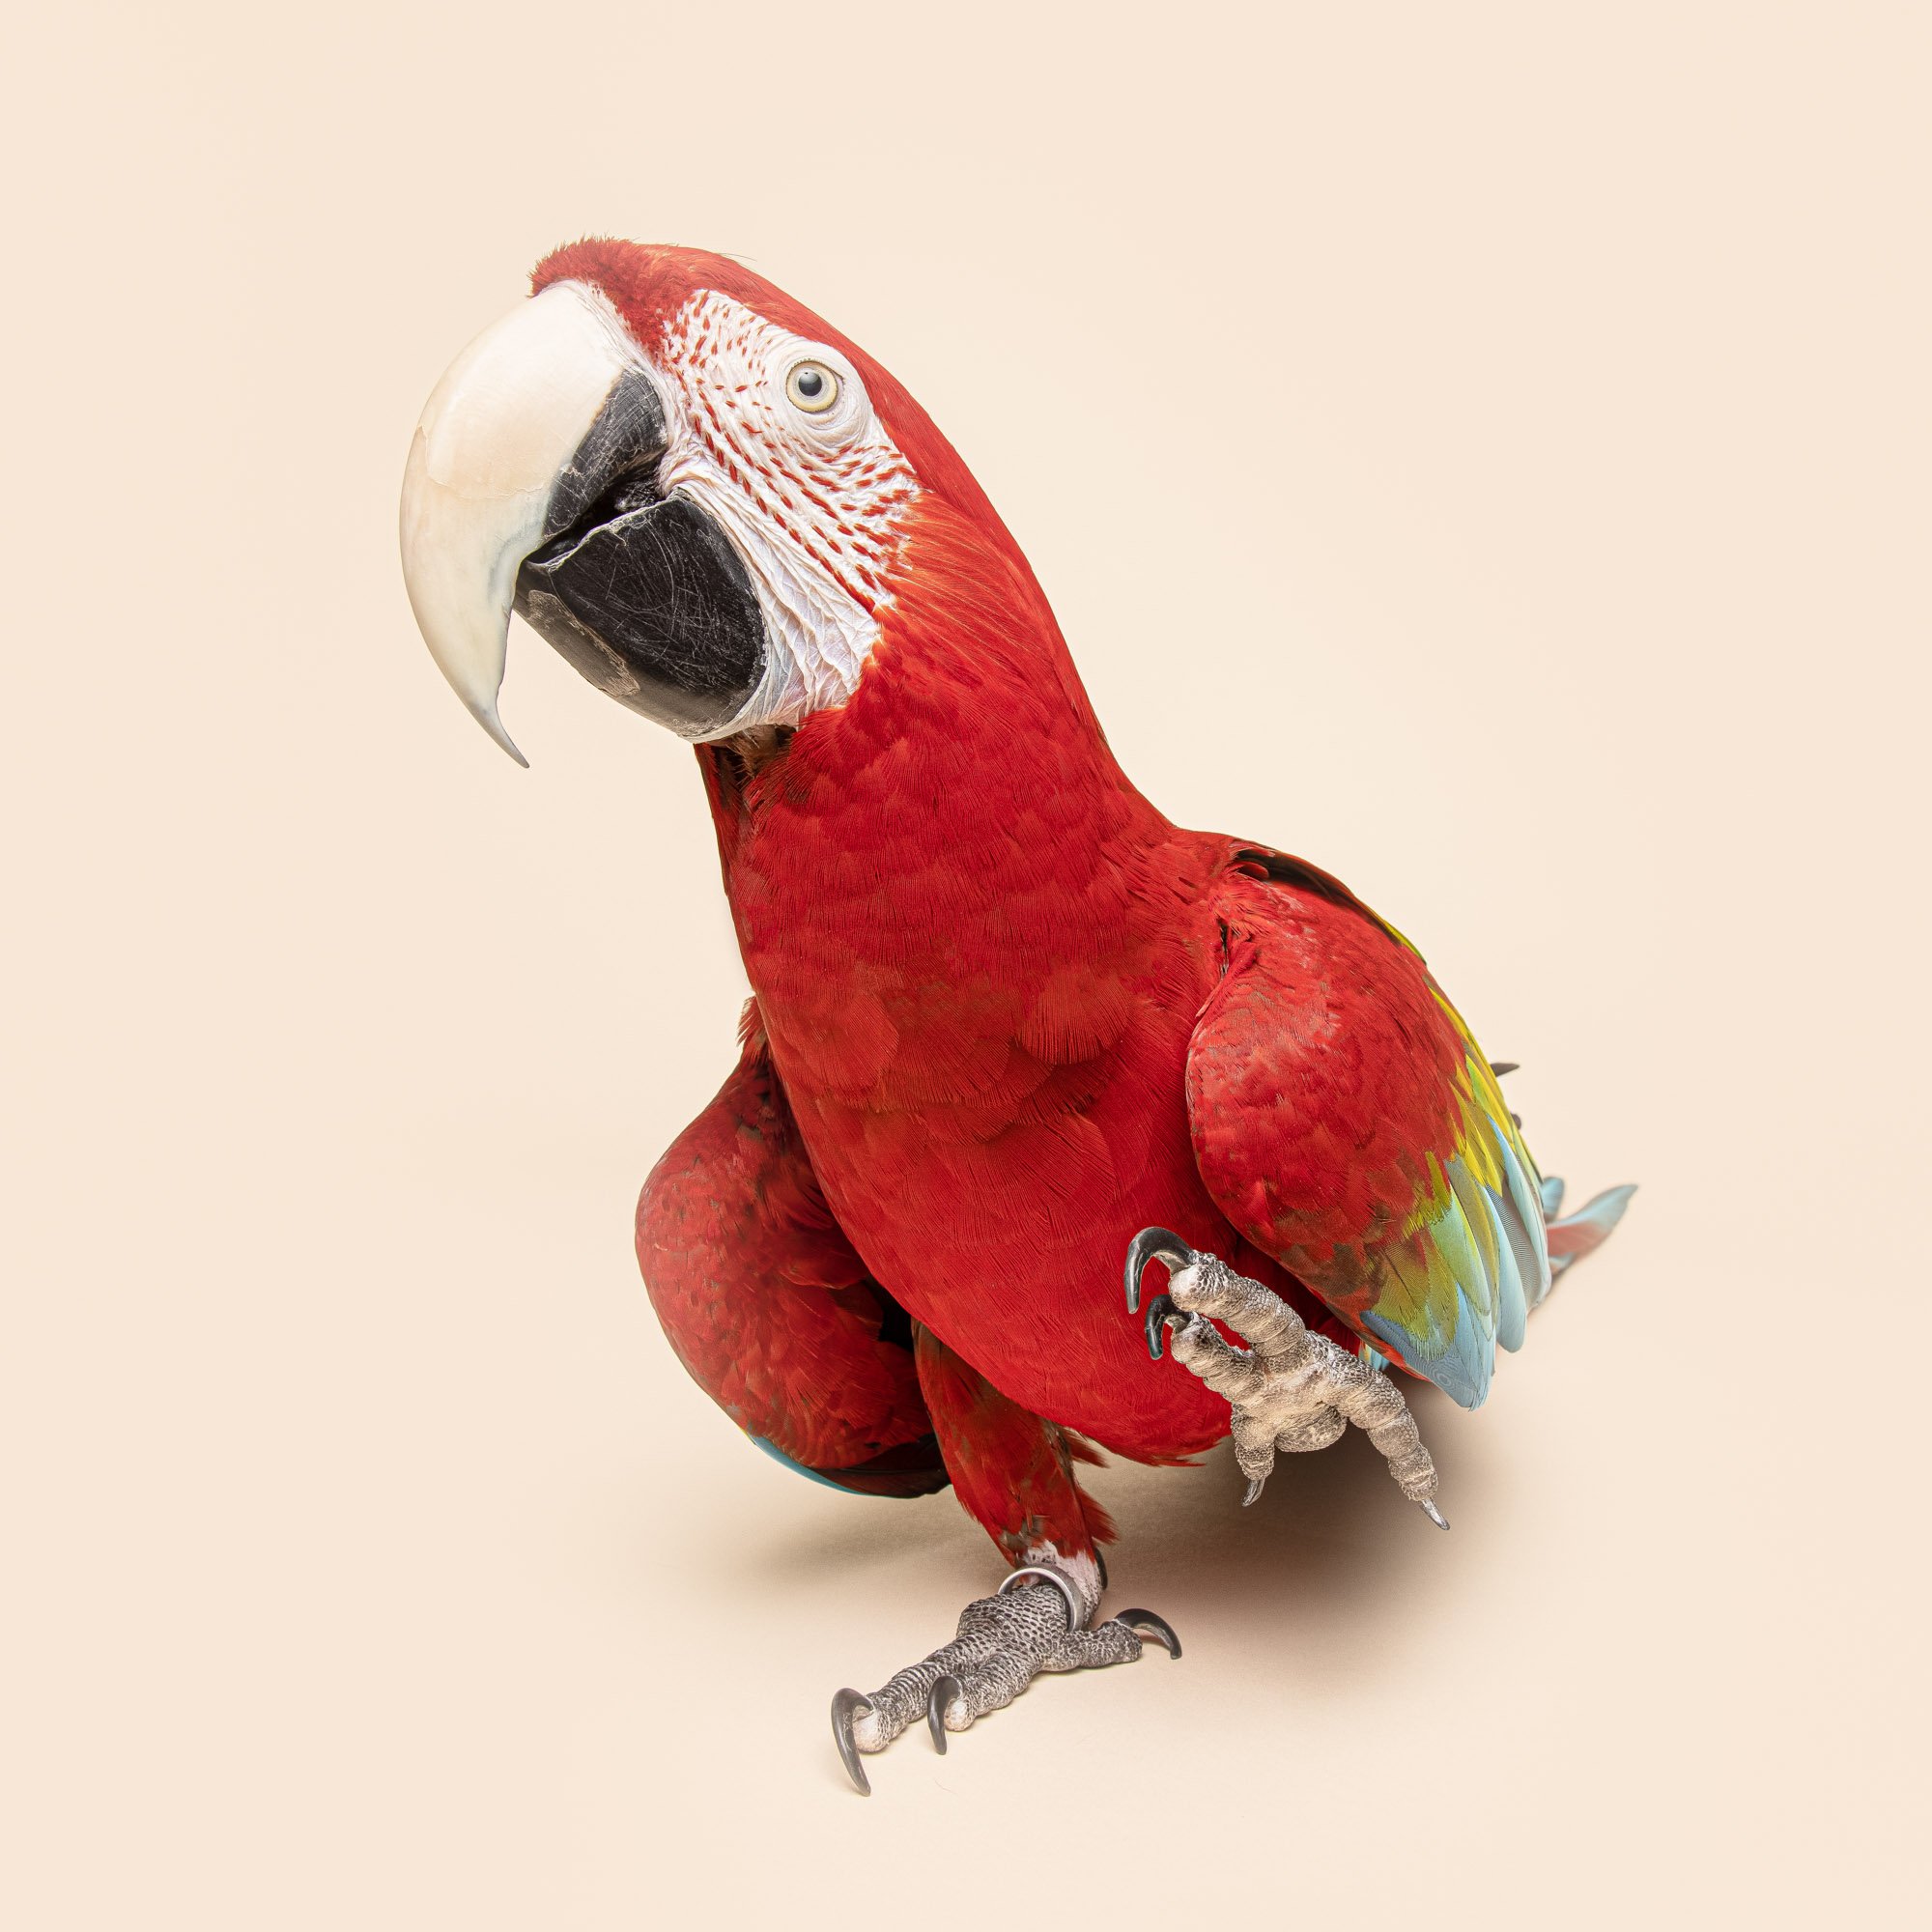 Greg Murray Photography | Pet and Animal Stock Photography | studio portrait of red macaw parrot against beige backdrop.jpg